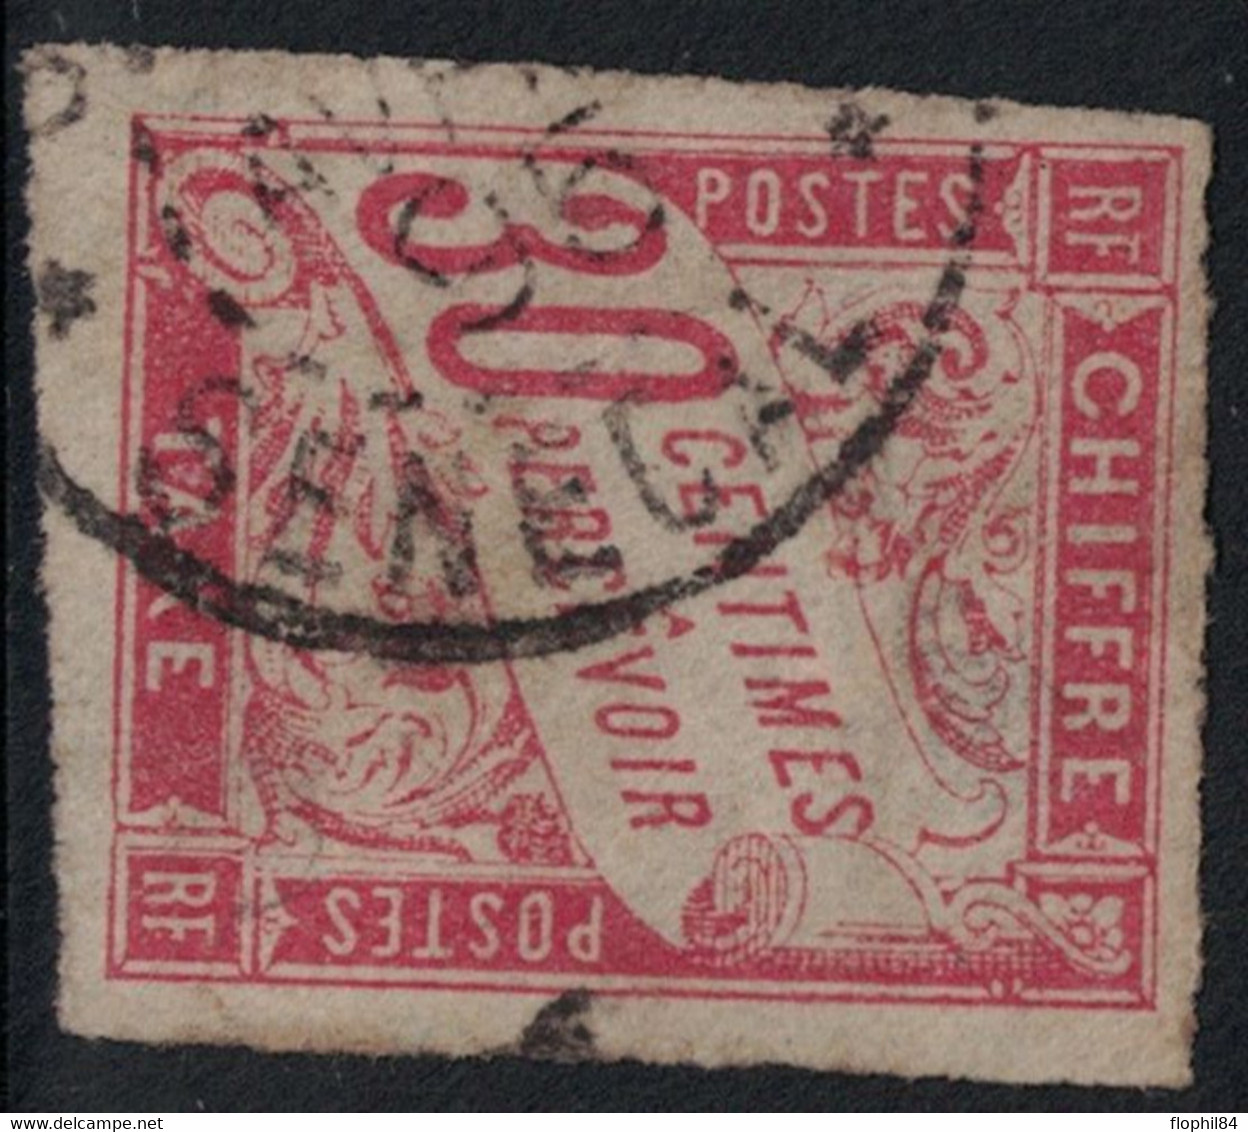 COLONIES GENERALES - TAXE - N°22 - OBLITERATION  CACHET A DATE - *SENEGAL* - COTE 30€. - Taxe